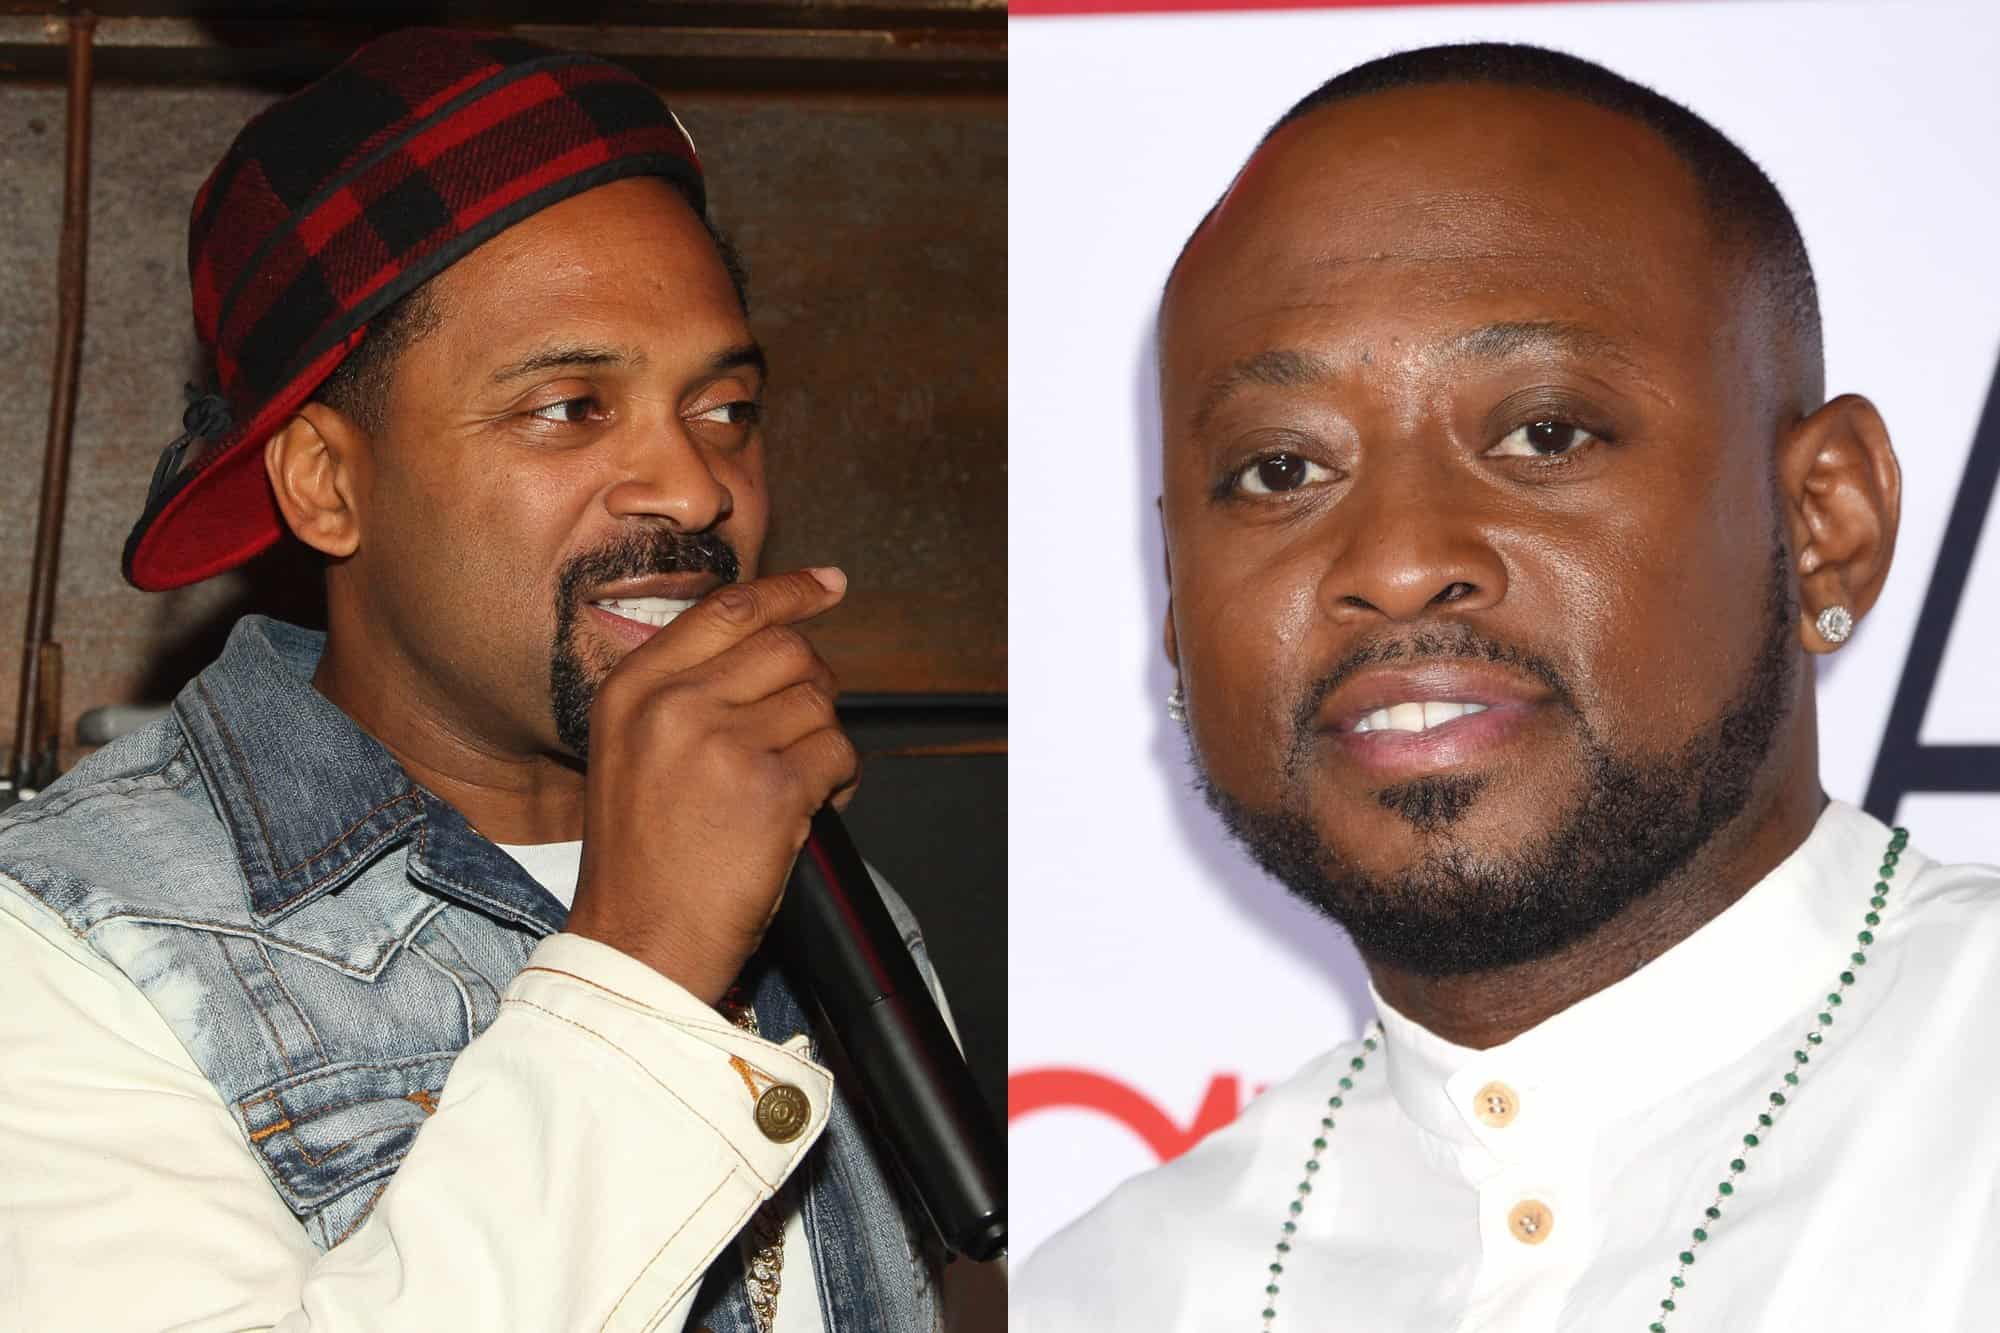 They’ve both enjoyed roles in the film industry, but are Omar Epps and Mike...